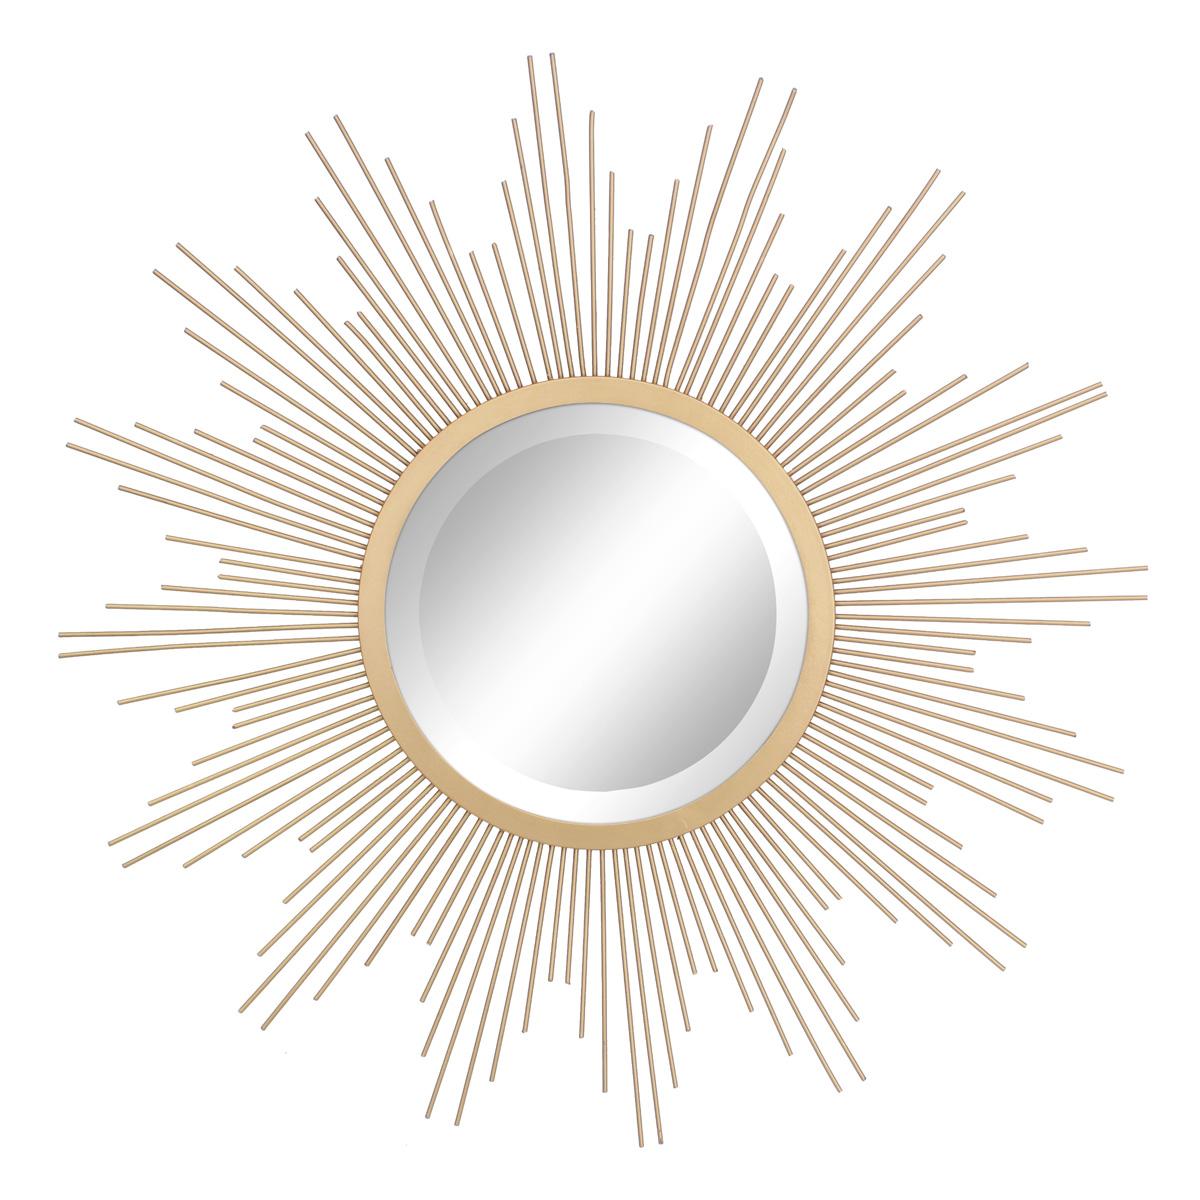 24in Stonebriar Collection Metal Sunburst Wall Mirror for $18